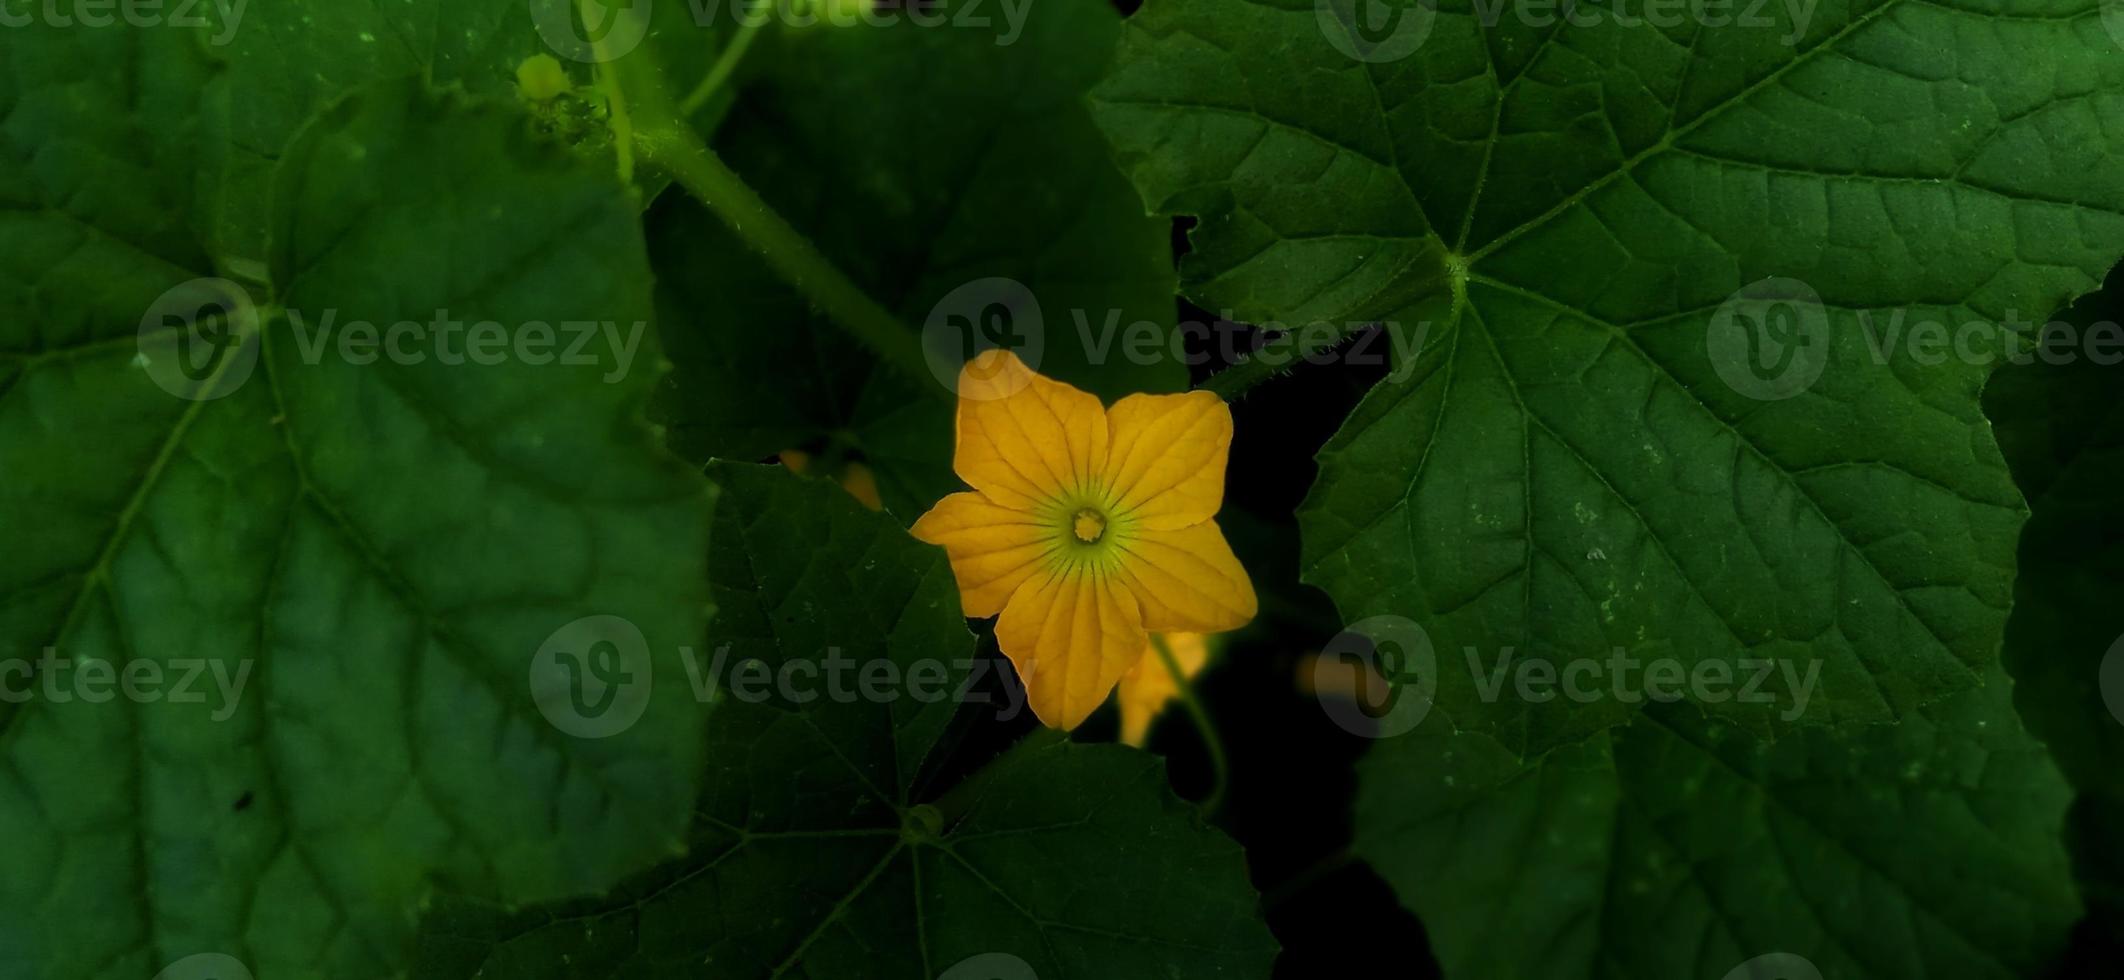 Beautiful green leaves and yellow flower of Cucumis sativus plant under the dim light condition. Suitable for magazine, promotion, backdrop, poster, science info, education, etc. photo